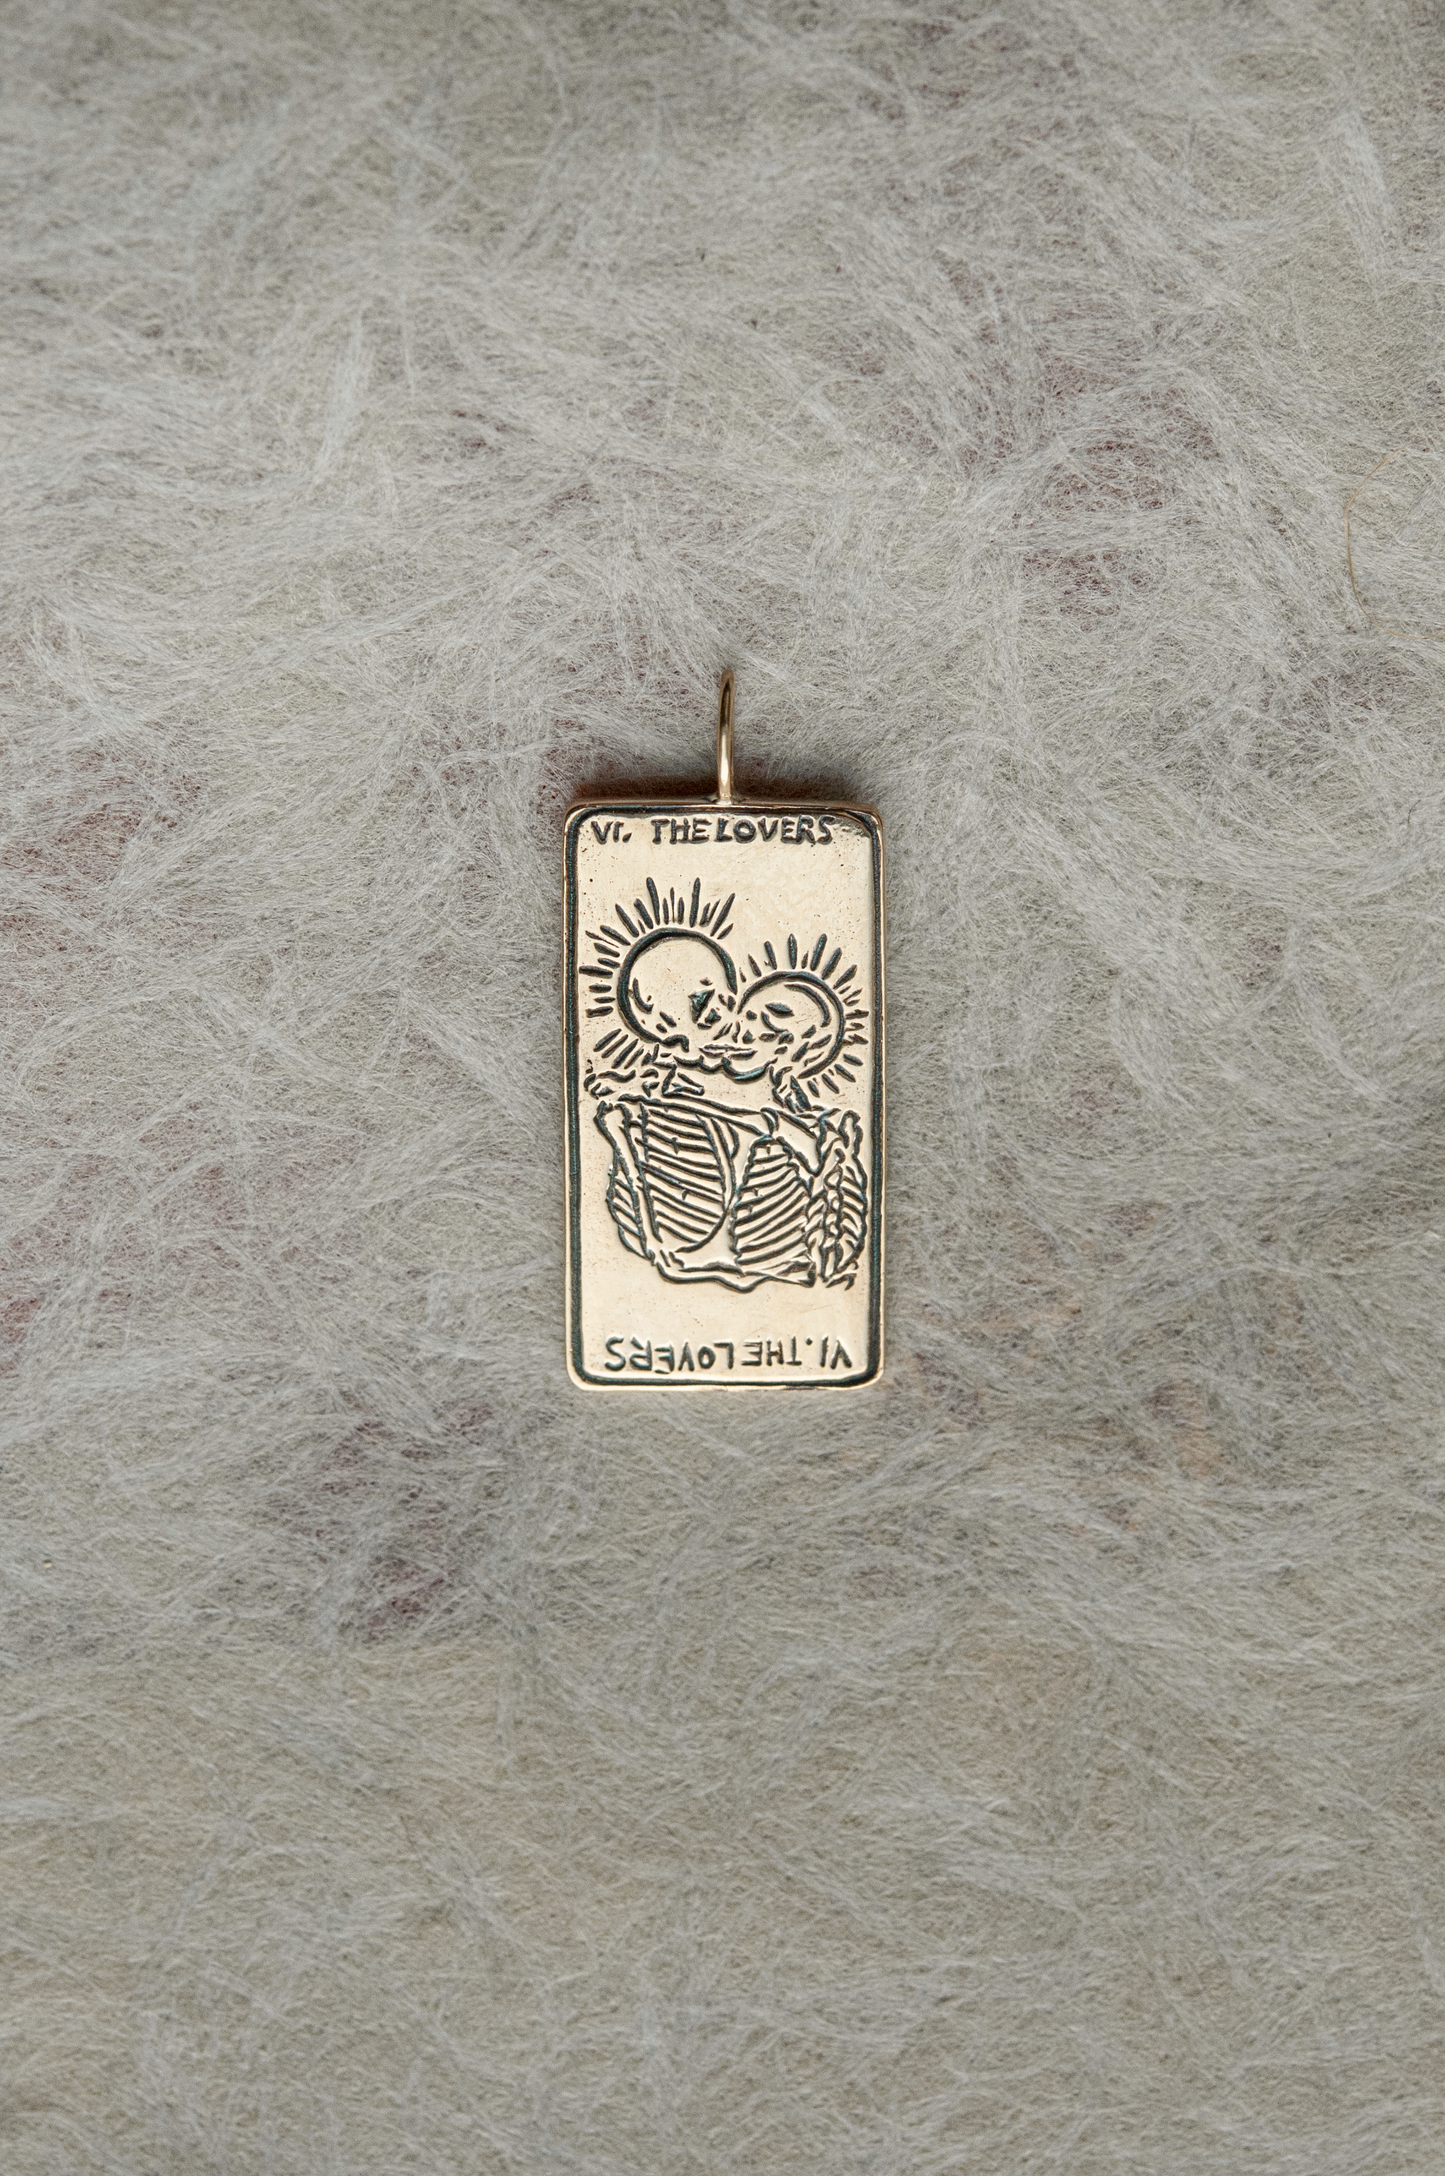 The Lovers Tarot Card II. Necklace